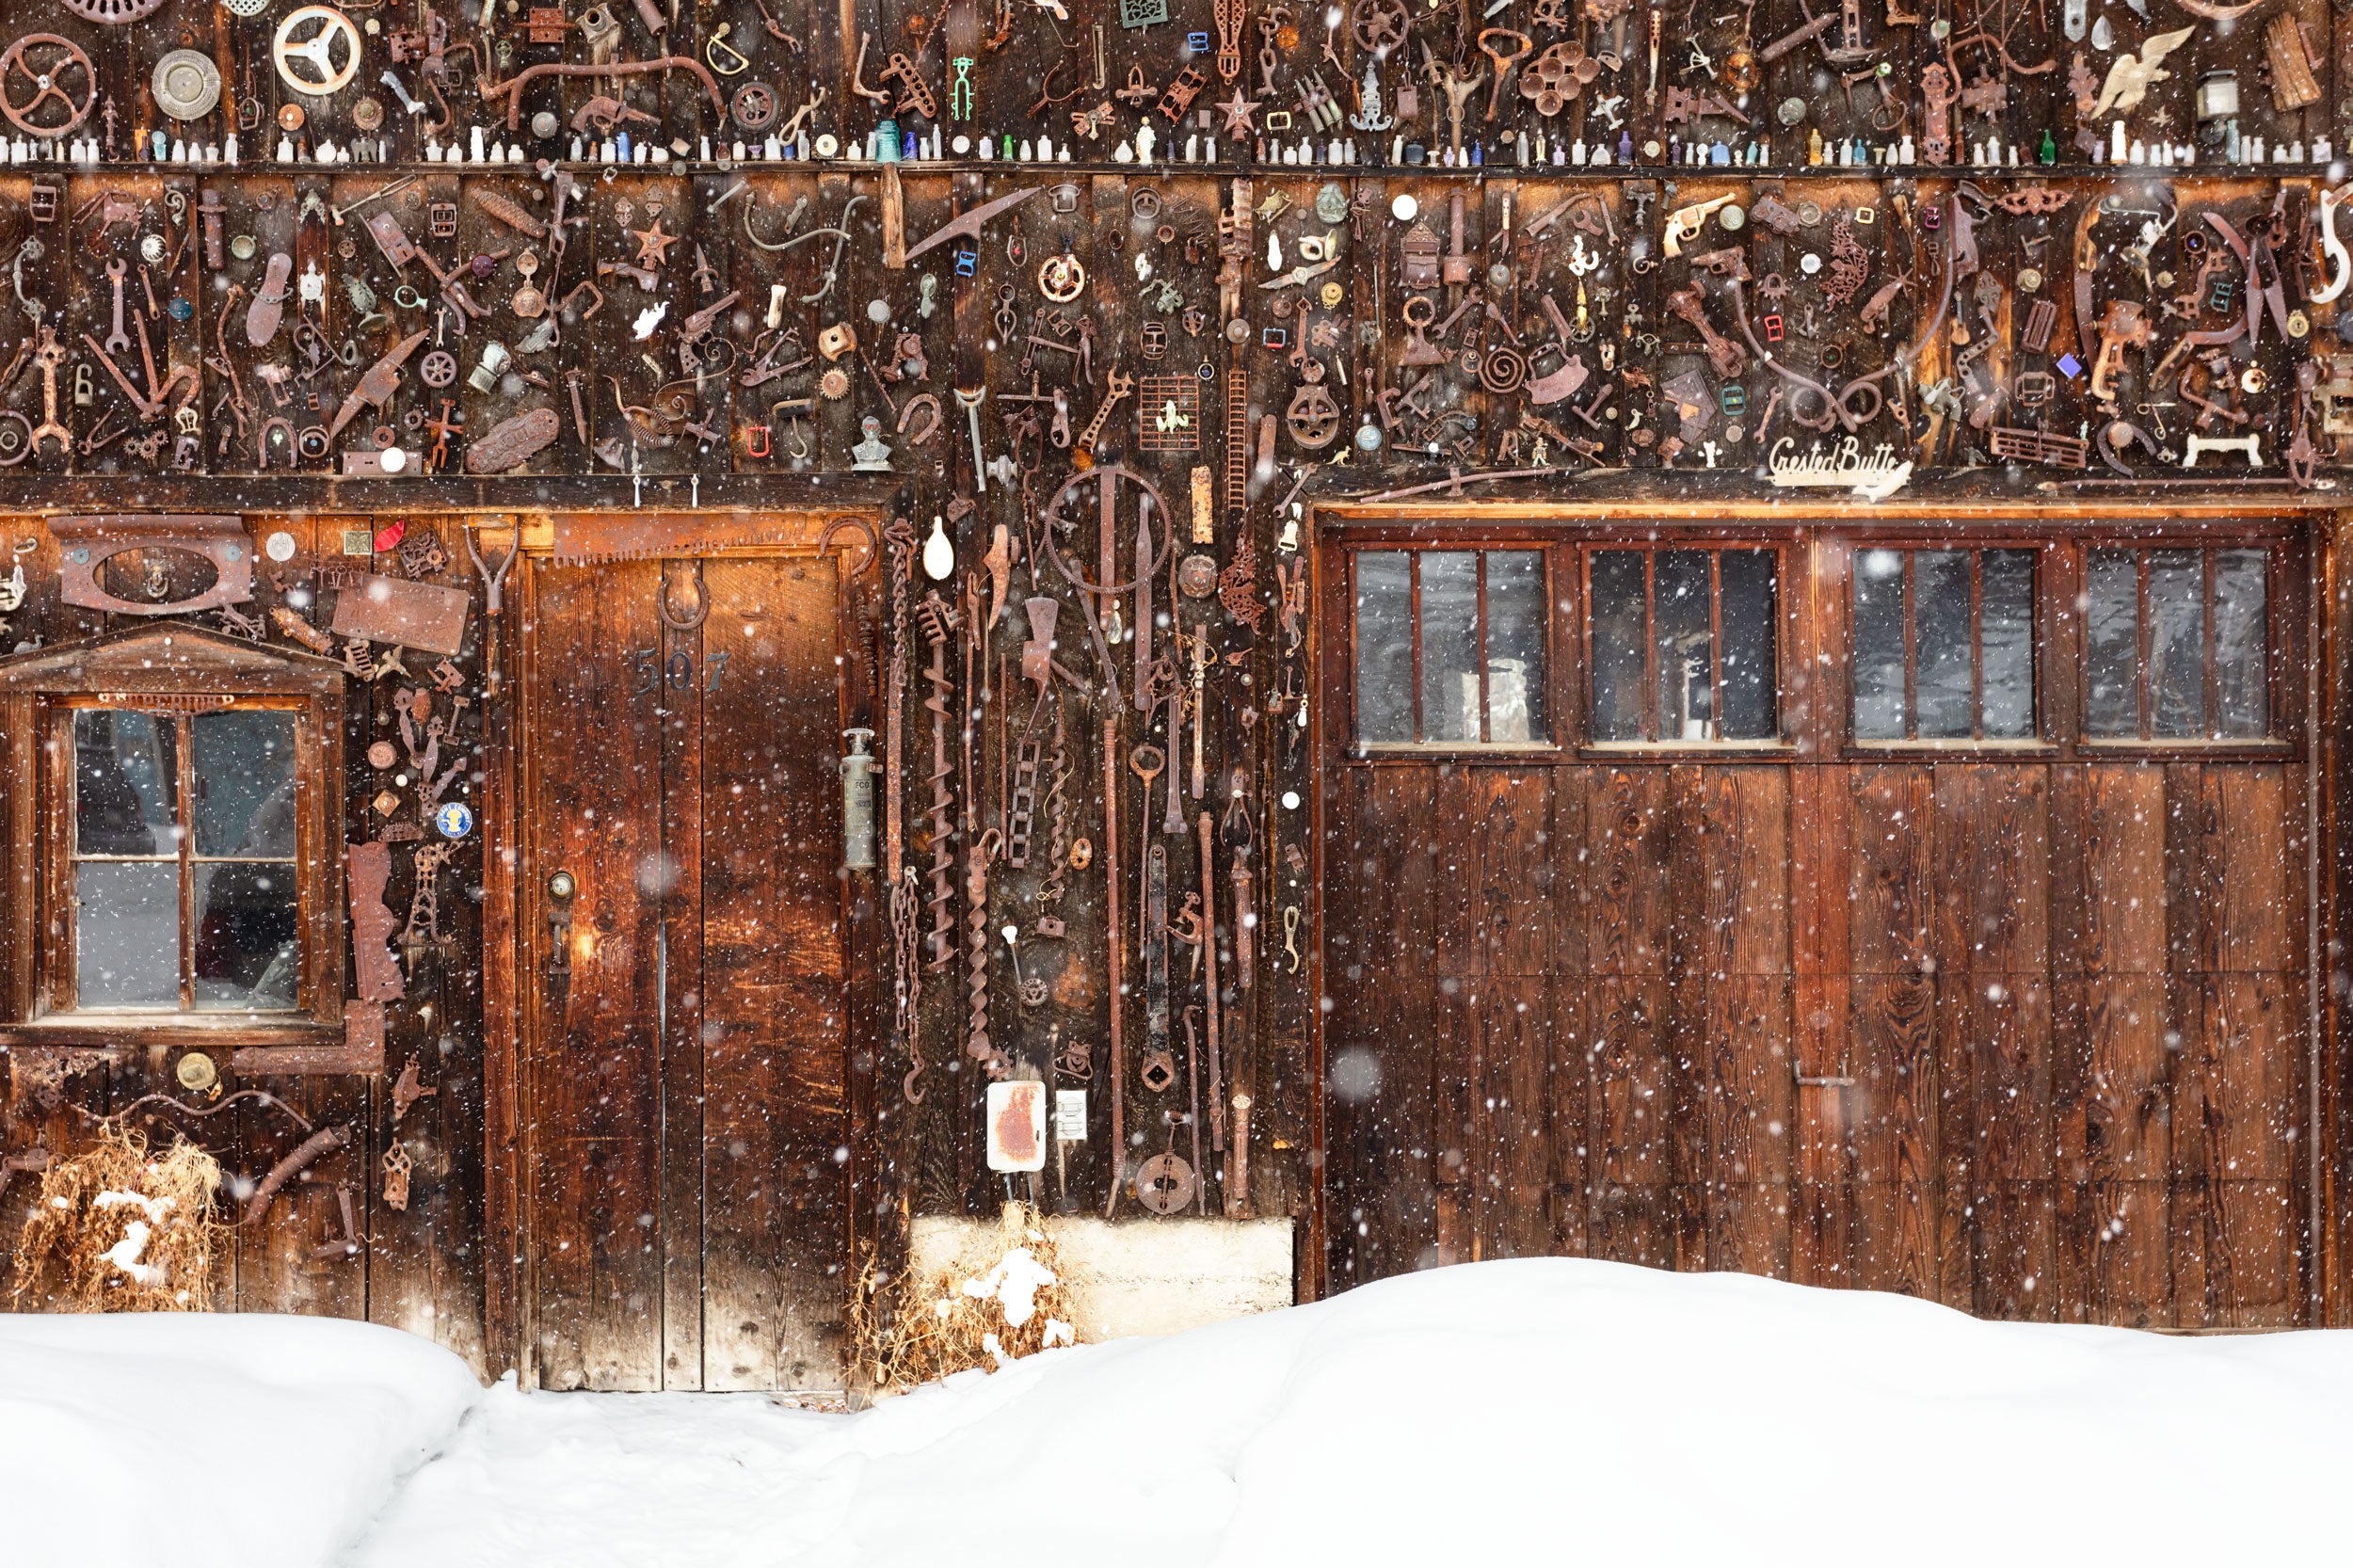 A Lars Gesing Fine Art Nature photograph of a quaint old shed during a snowstorm in the town of Crested Butte, Colorado, one of the best and most popular places to ski and visit in Colorado and one of the best mountain towns in the American West to buy a vacation home.